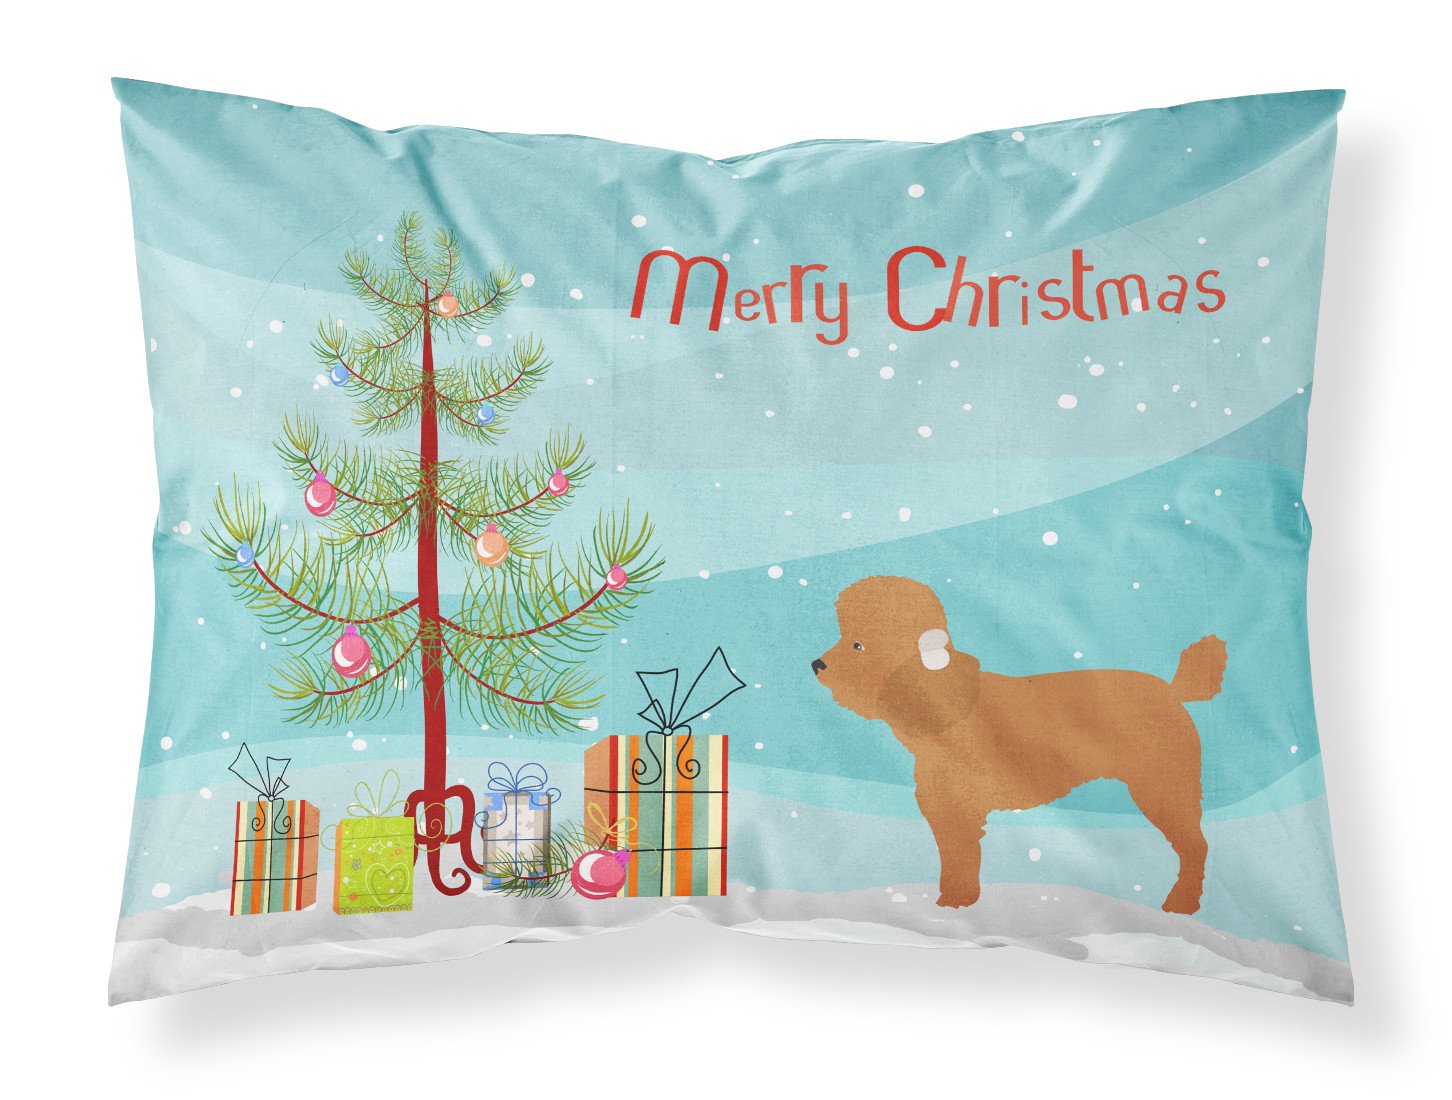 Toy Poodle Christmas Fabric Standard Pillowcase BB8478PILLOWCASE by Caroline's Treasures